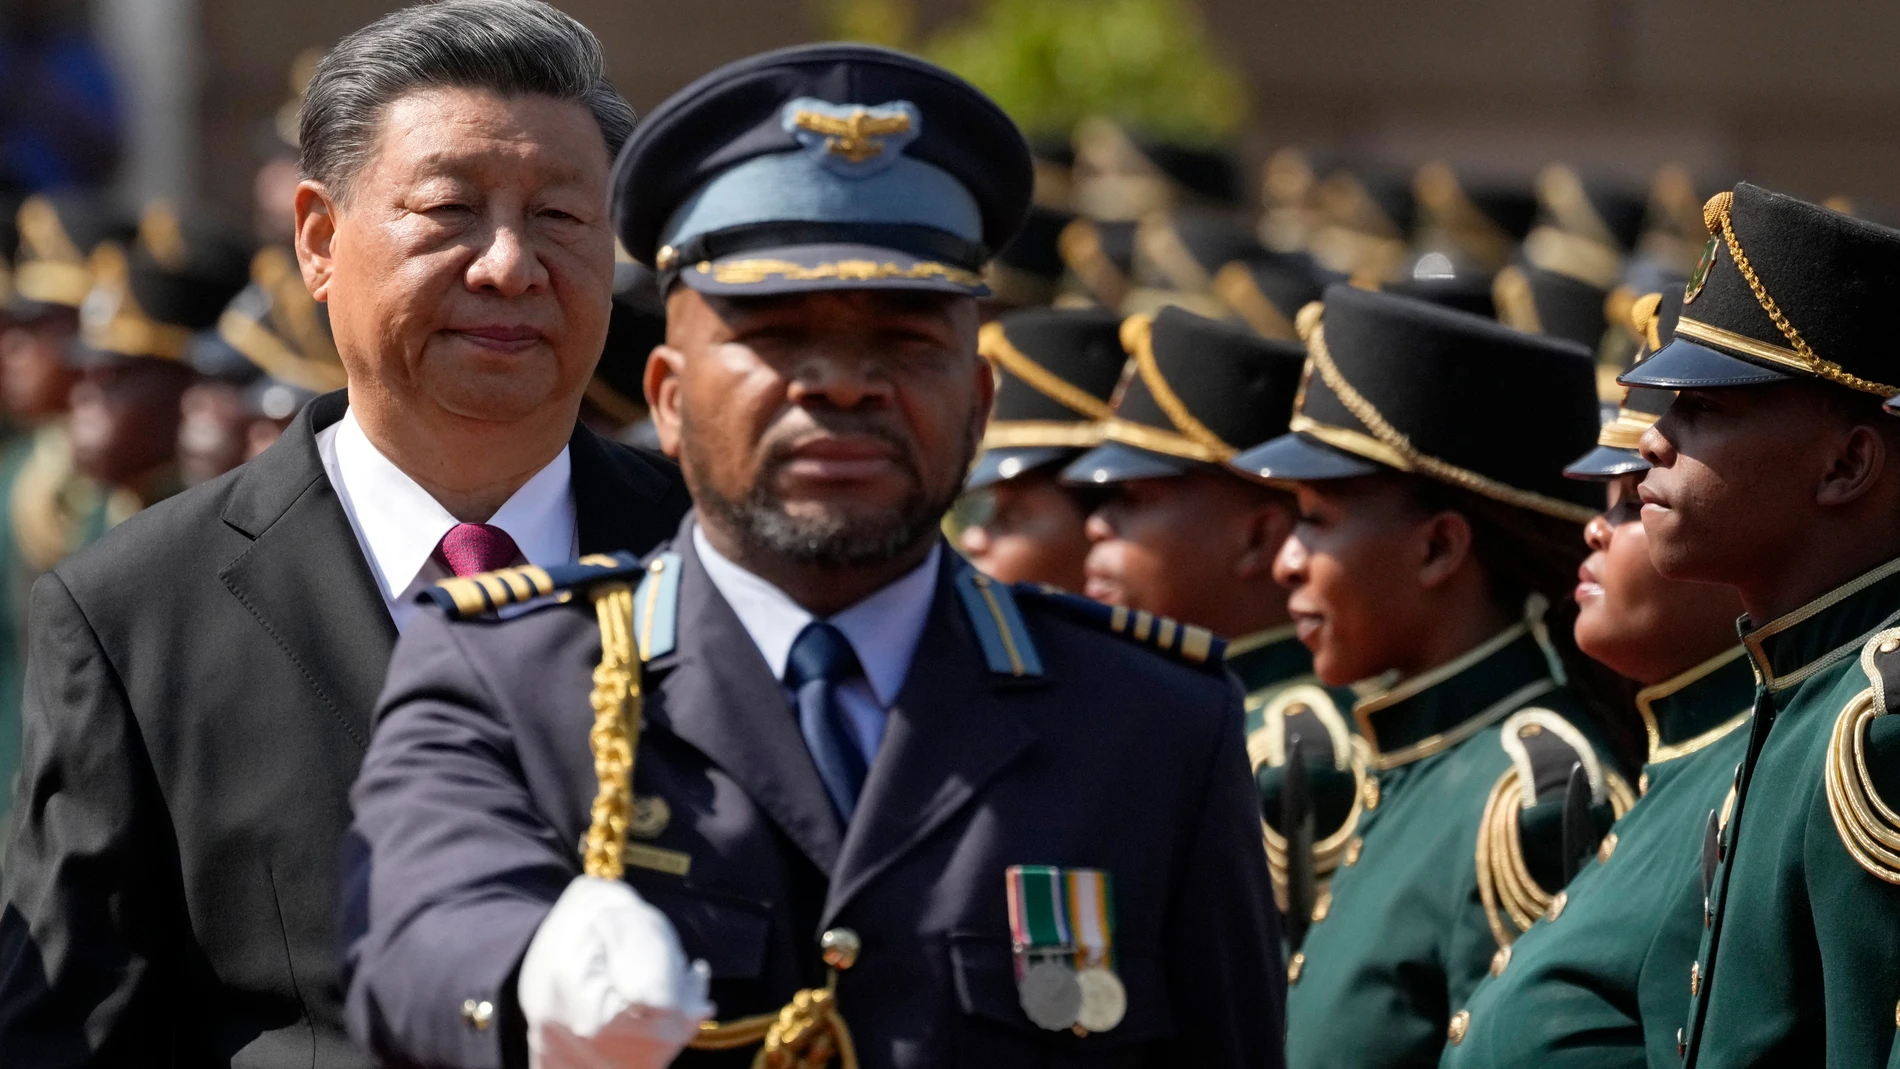 Chinese President Xi Jinping observes a guard of honour during a state visit at Union Building in Pretoria, South Africa, Tuesday, Aug. 22, 2023. Chinese President Xi Jinping has arrived for a state visit in South Africa where the two countries are expected to strengthen ties ahead of the BRICS summit starting in Johannesburg on Tuesday. (AP Photo/Themba Hadebe)